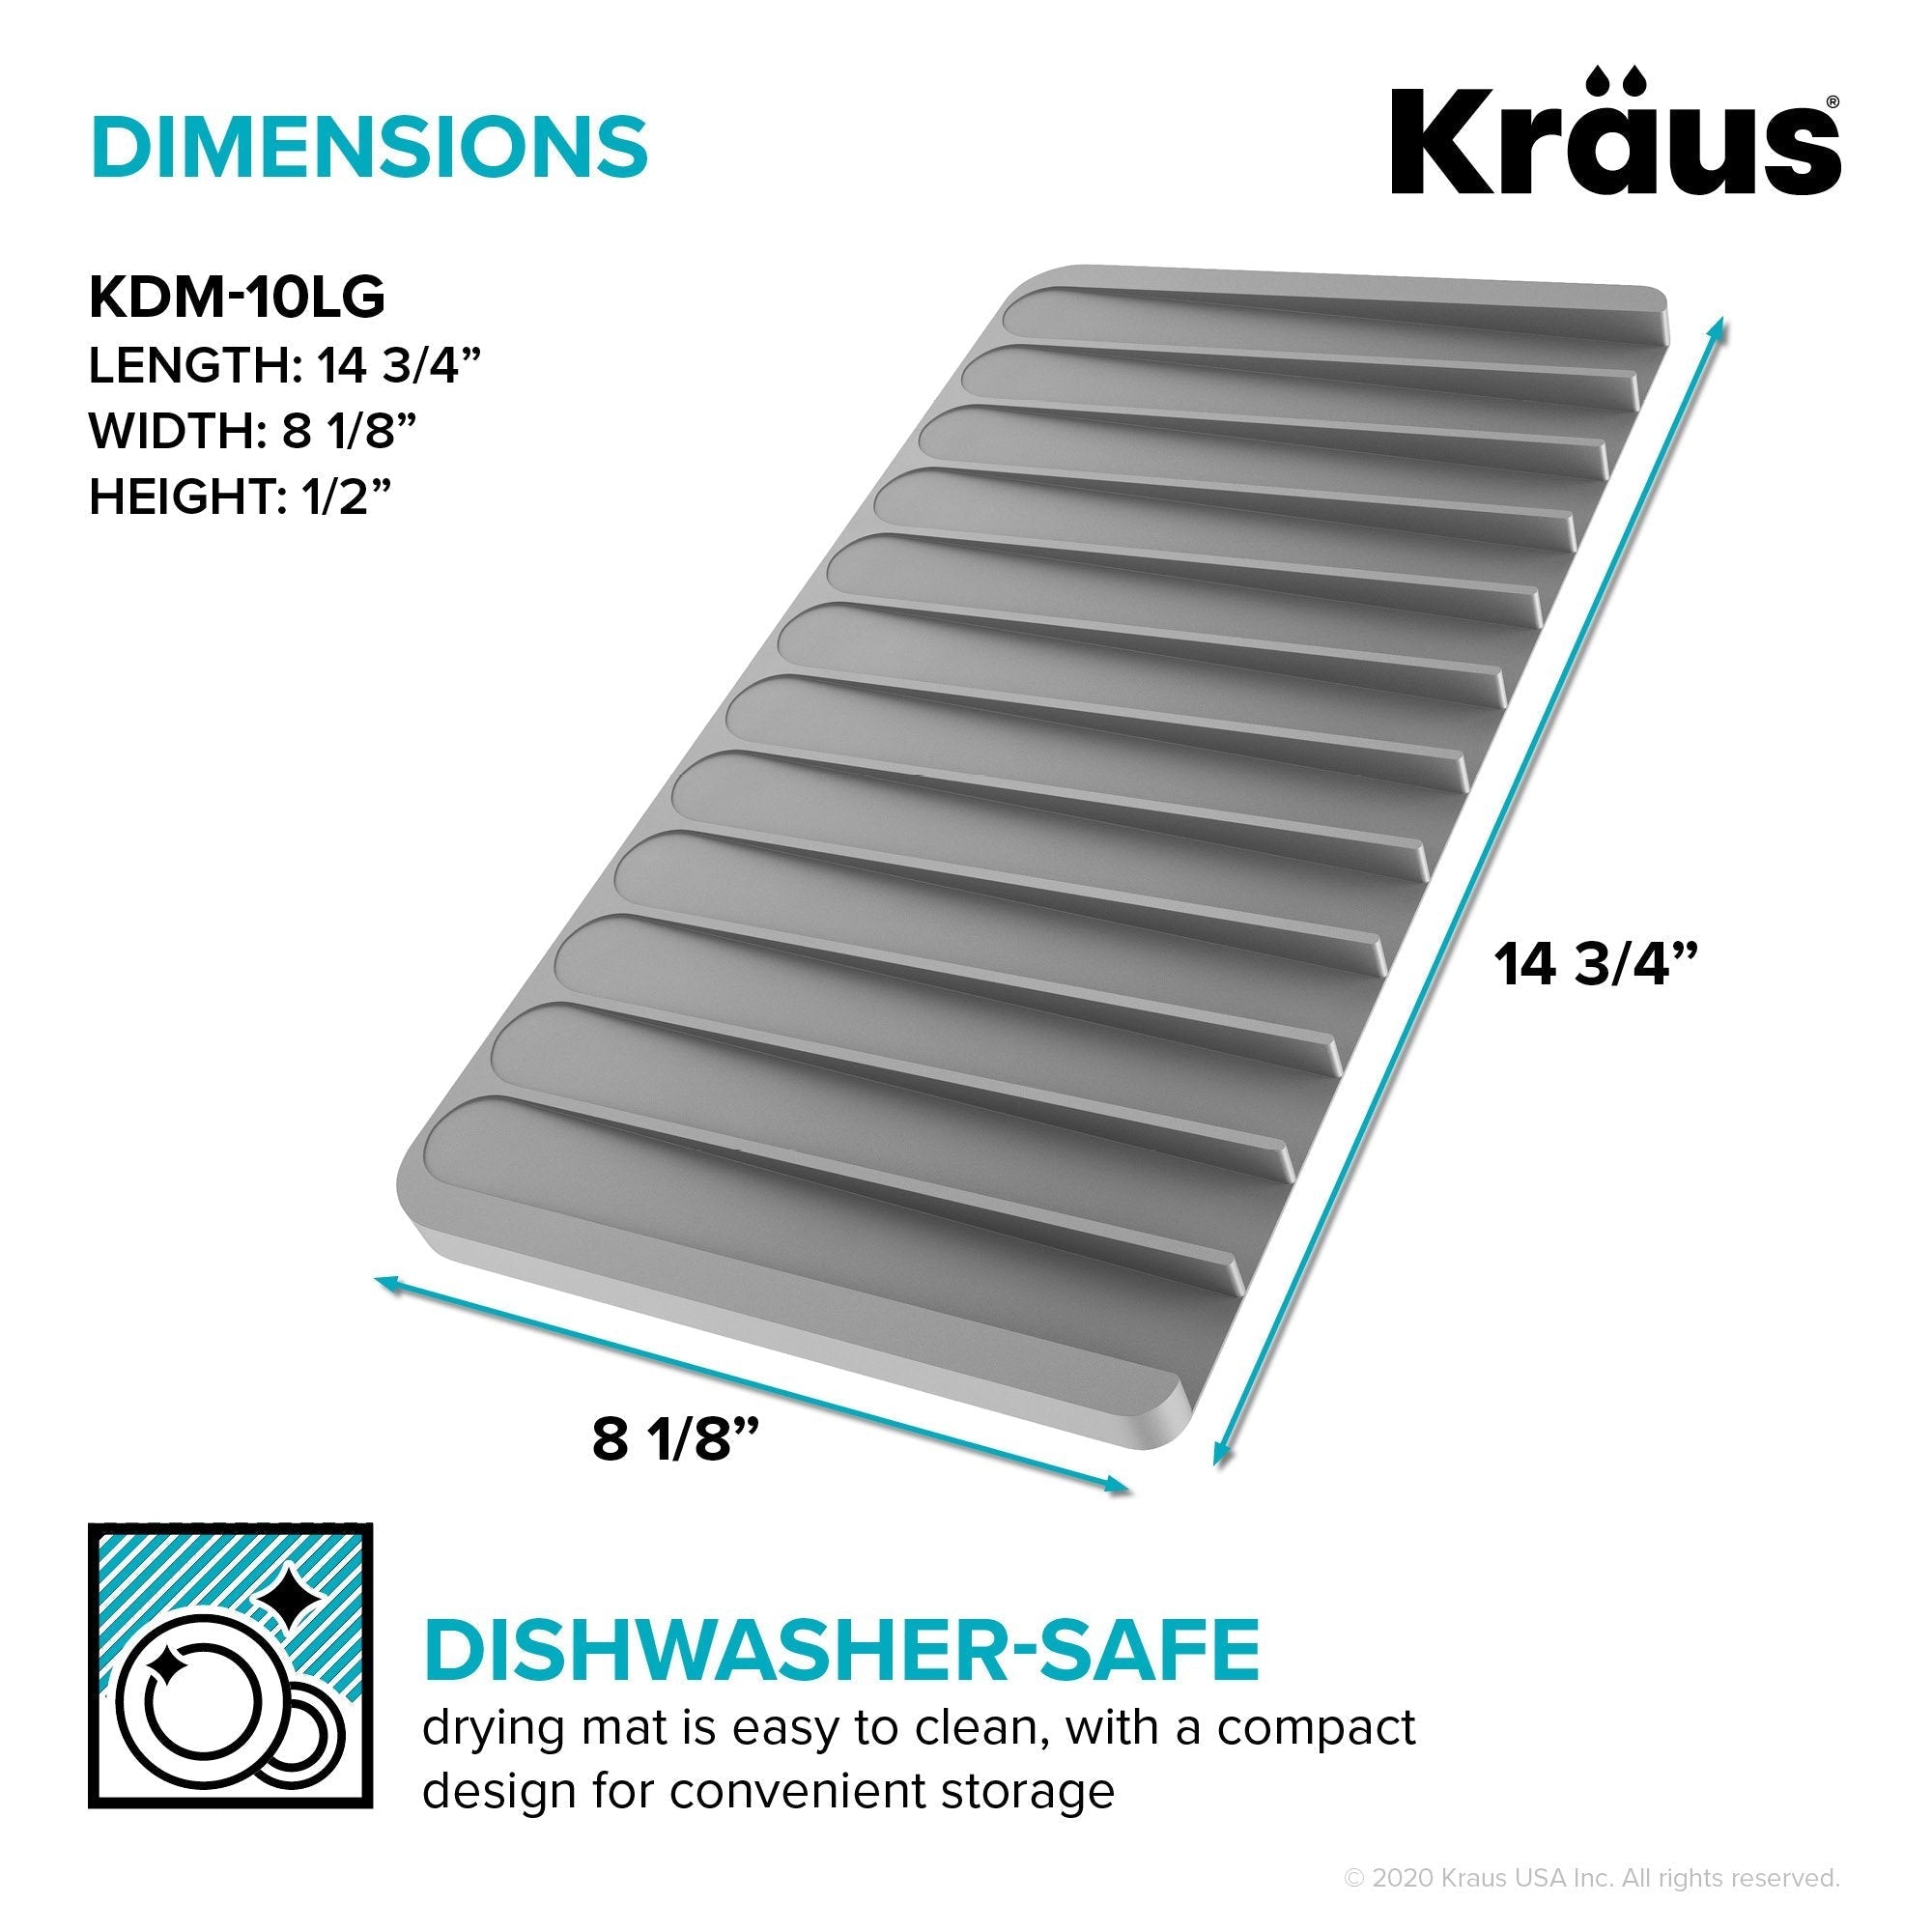 Kraus KDM-10BL Self-Draining Silicone Dish Drying Mat or Trivet for Kitchen Counter in Black